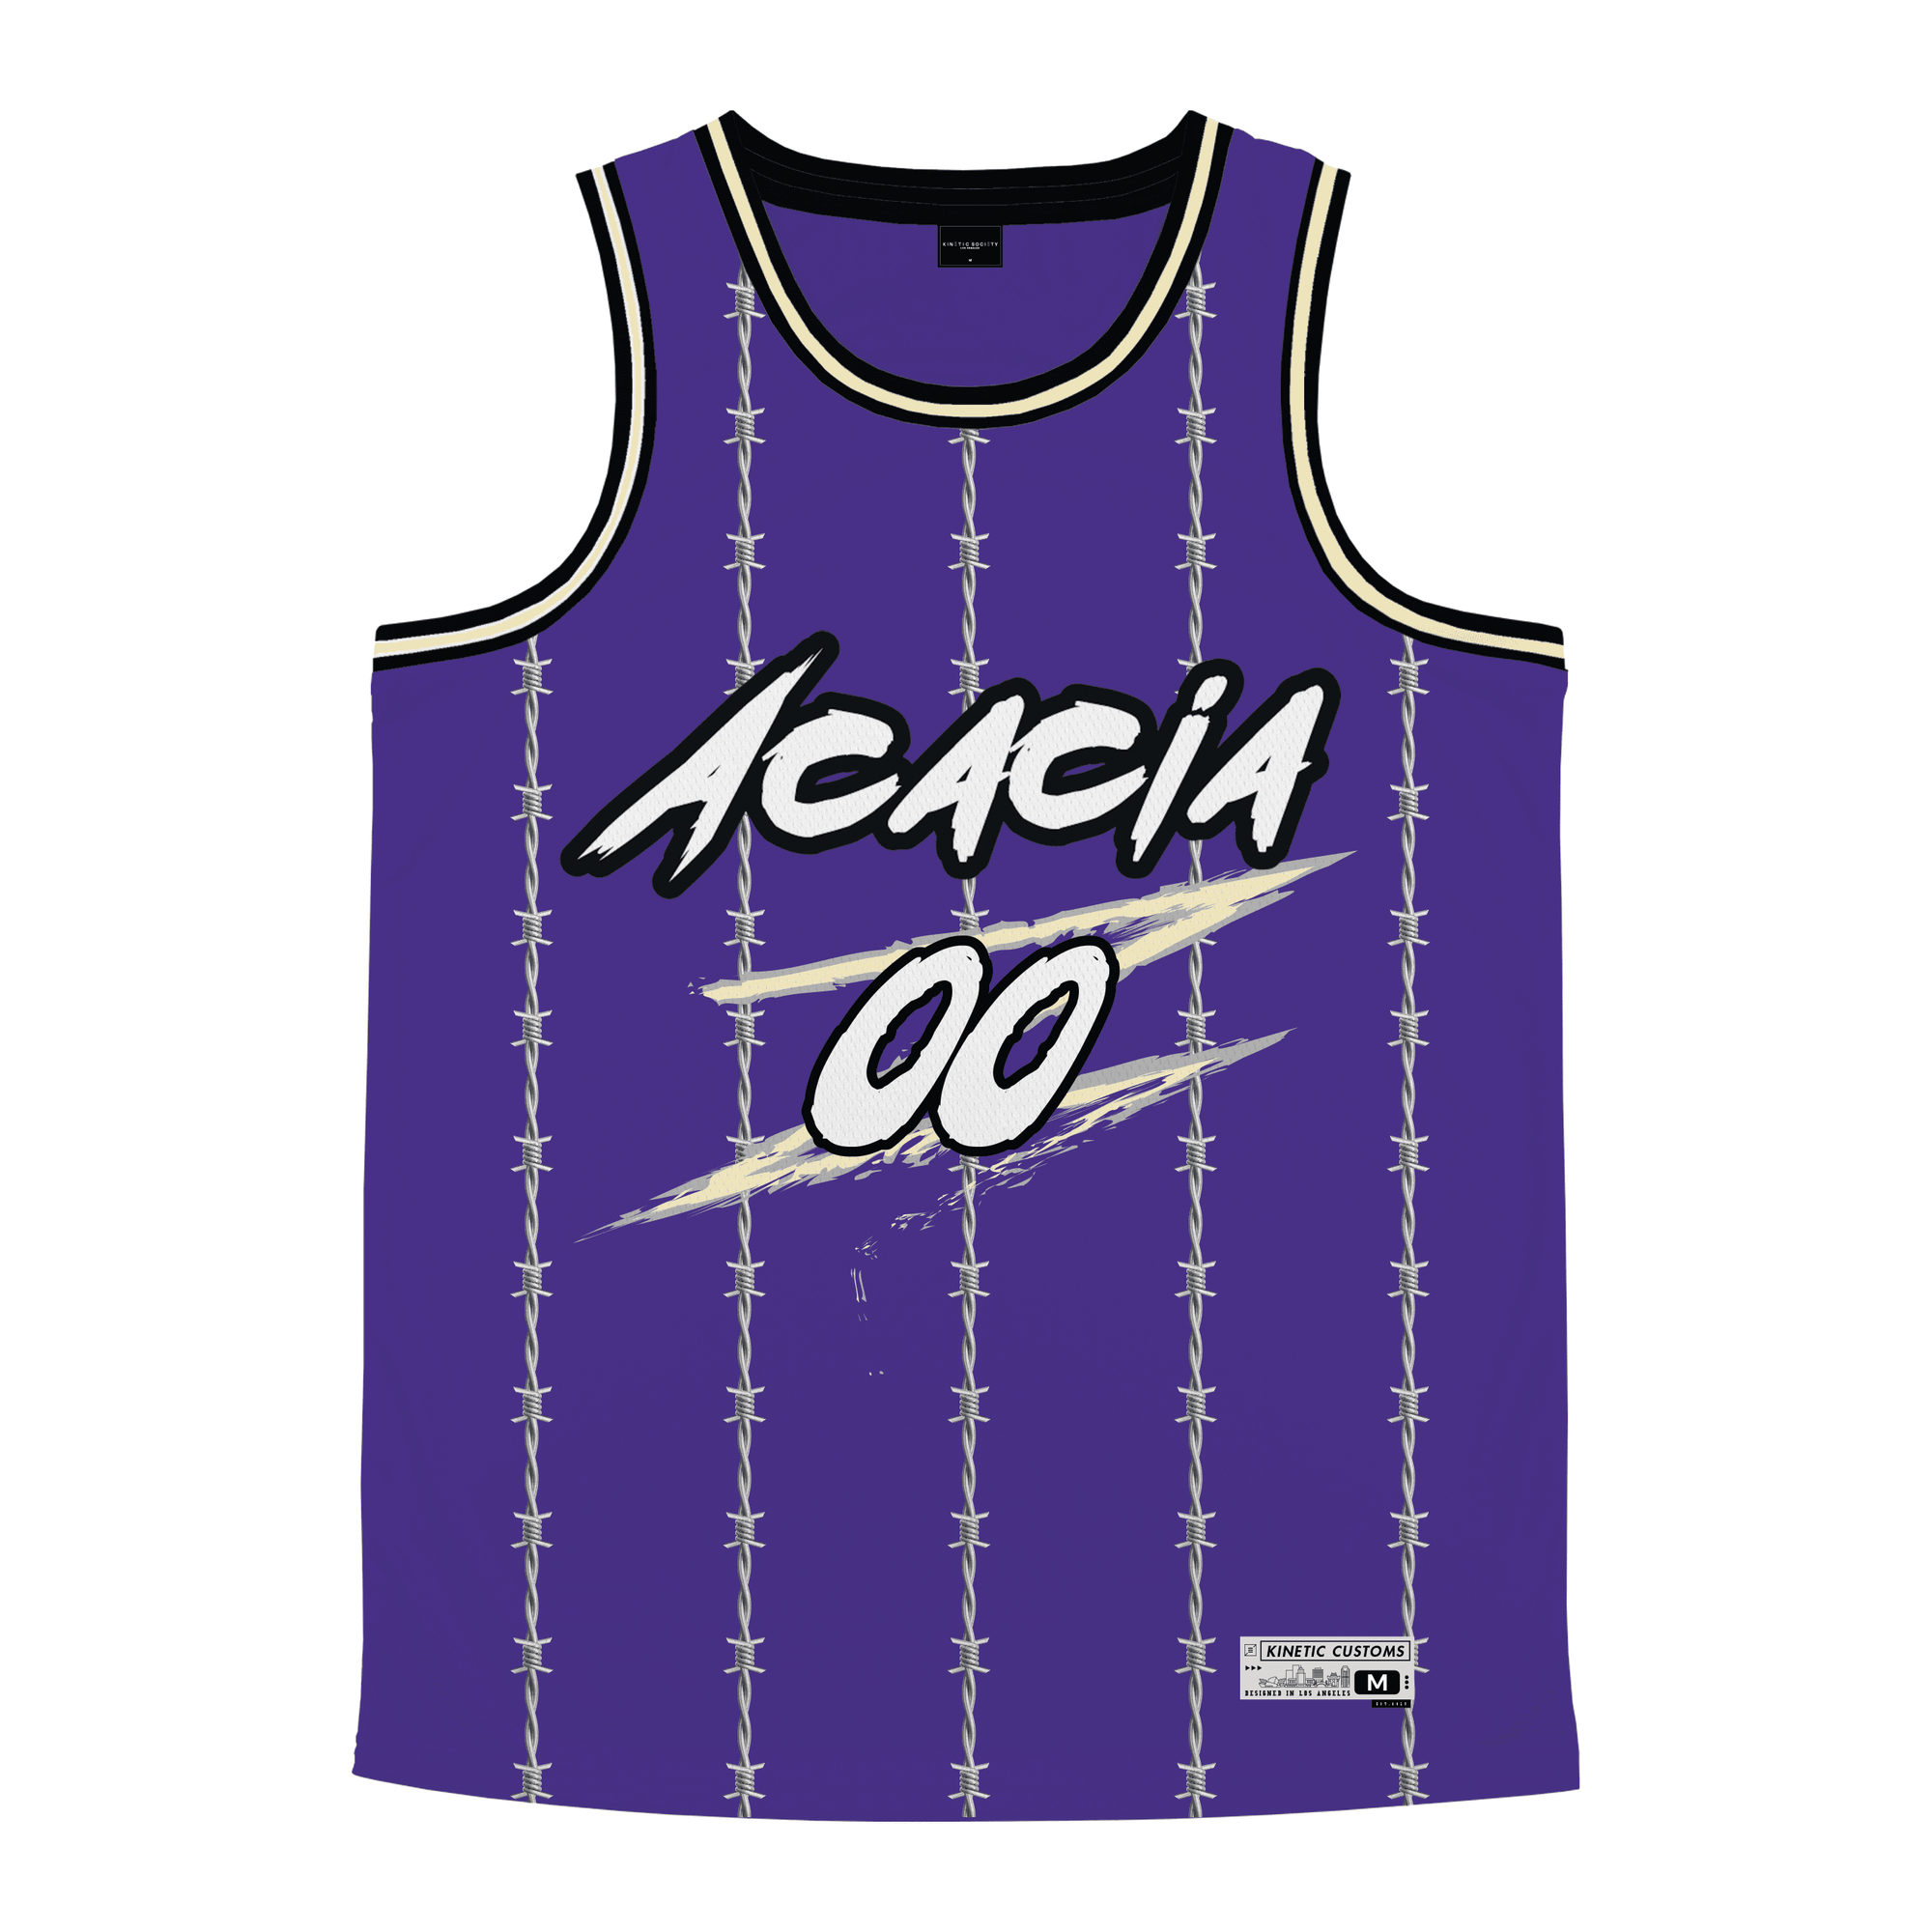 Acacia - Barbed Wire Basketball Jersey